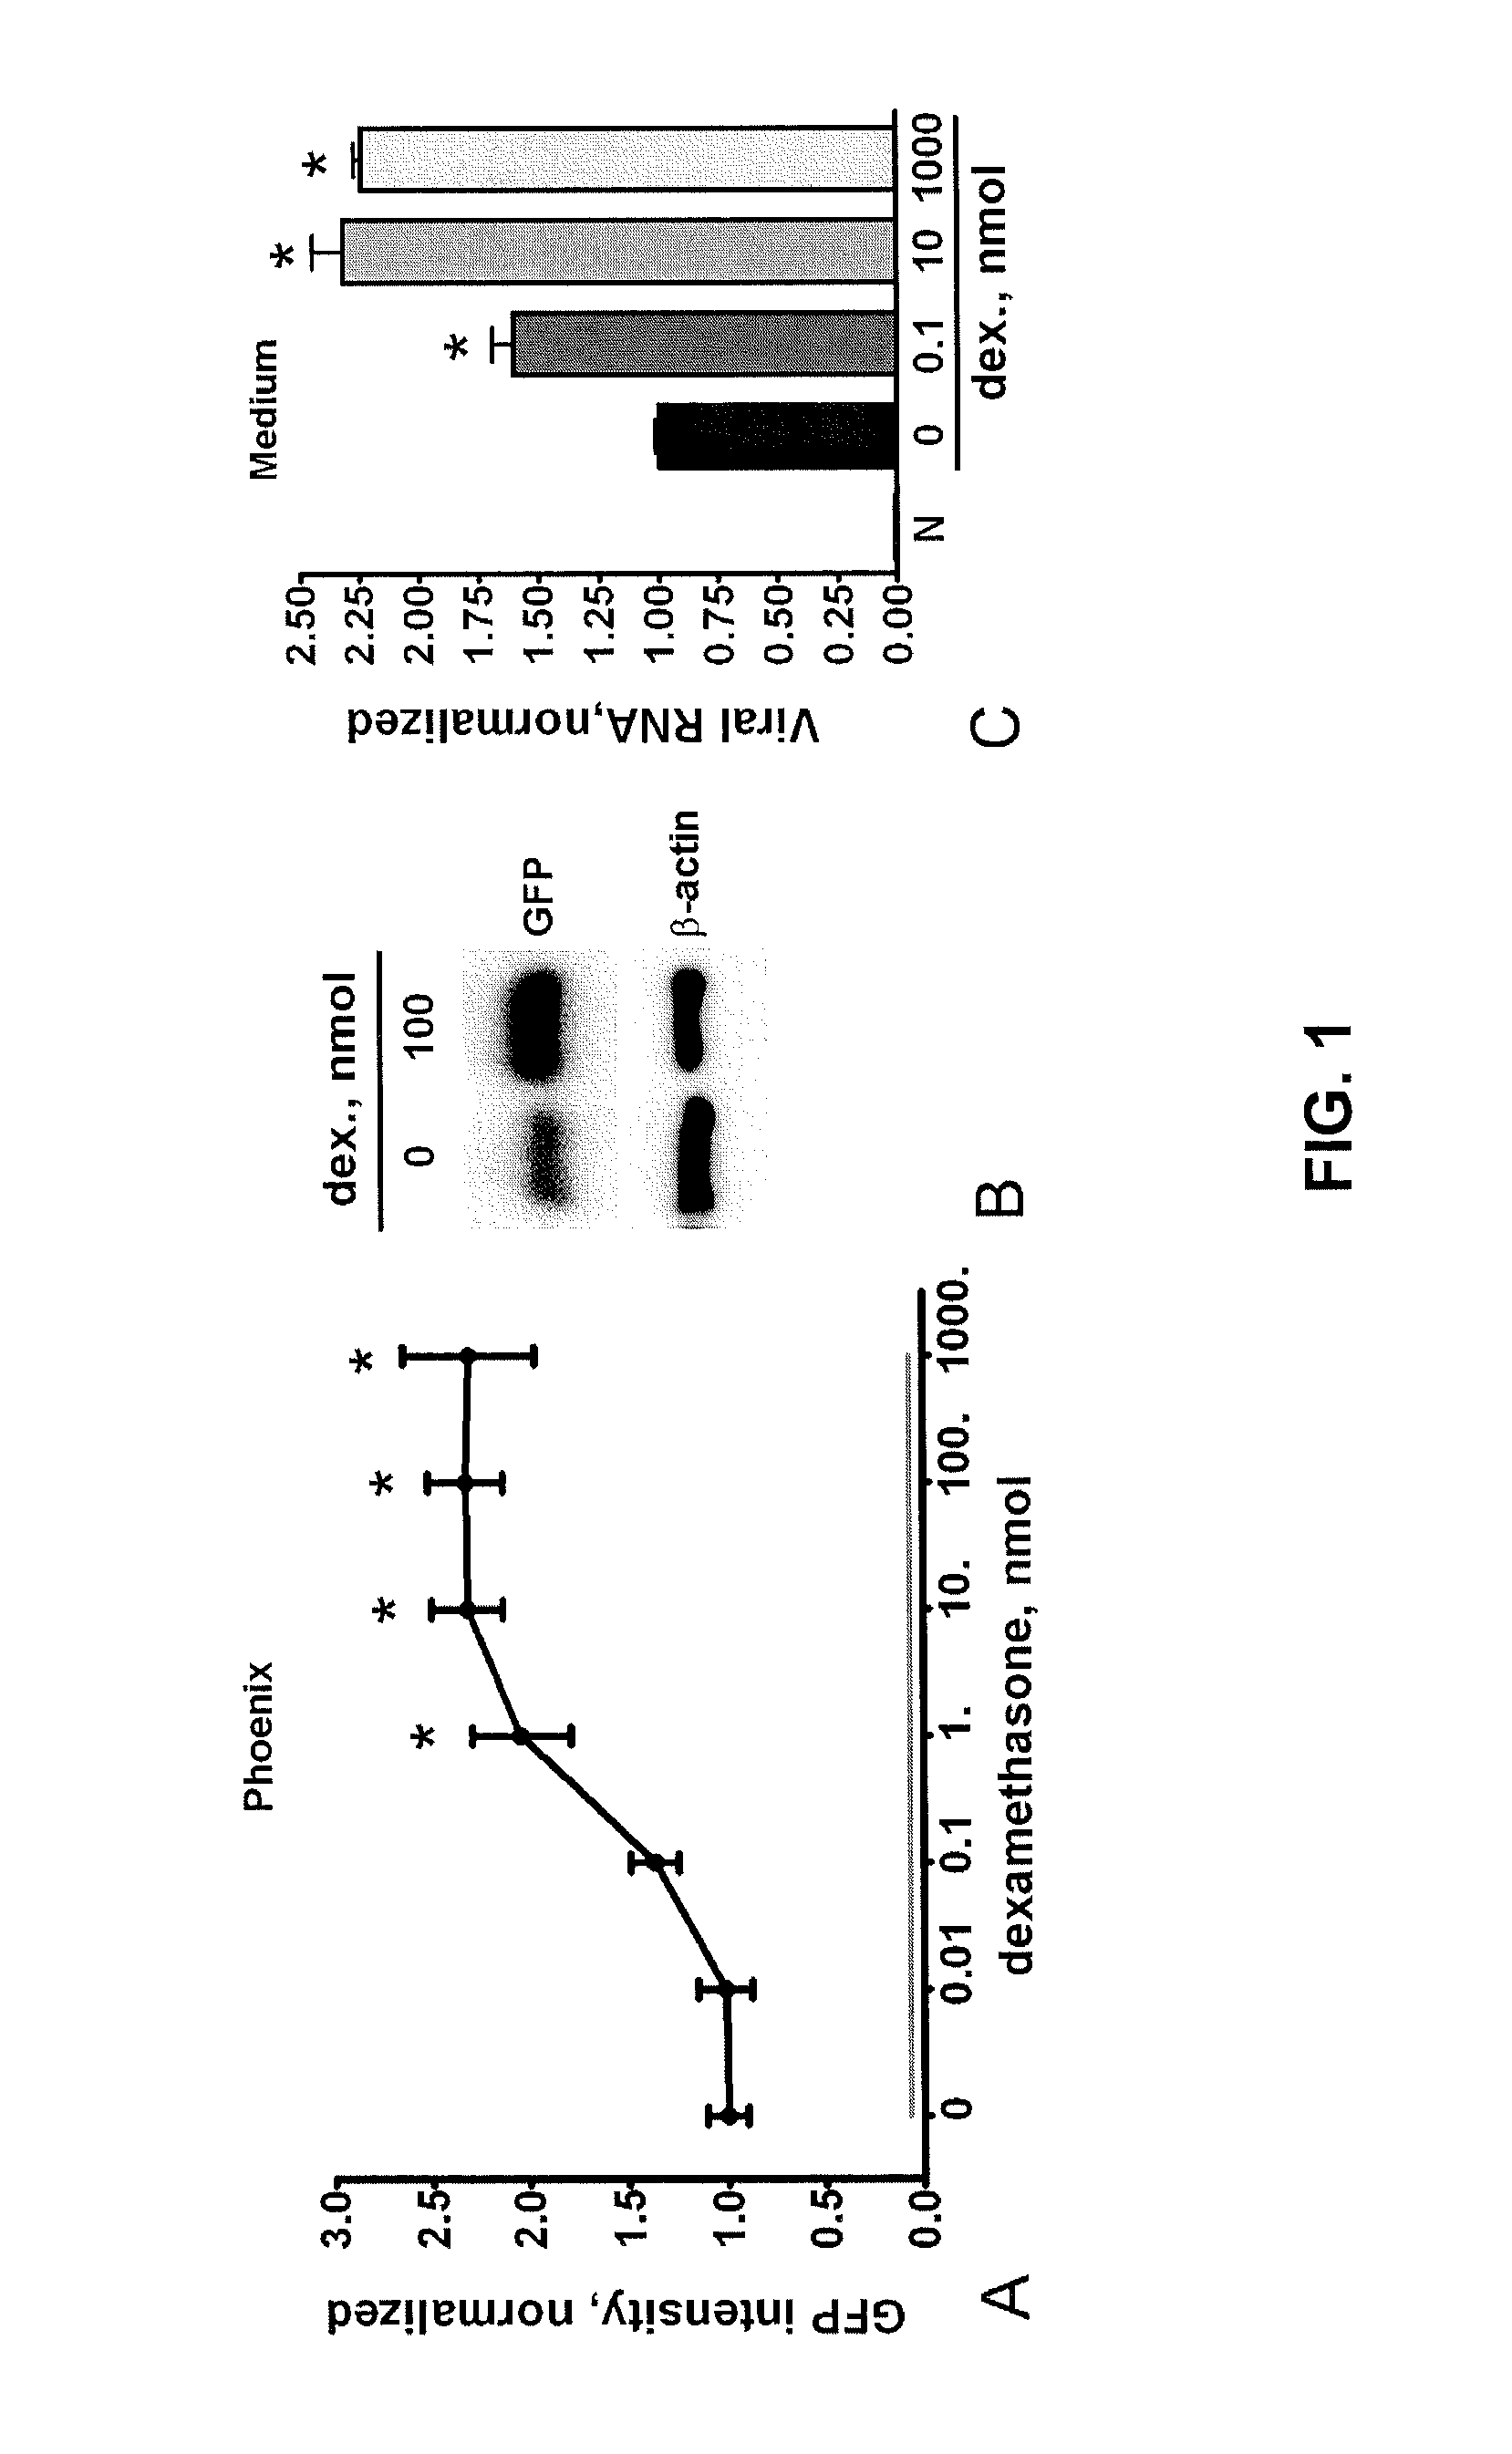 Method for increasing retroviral infectivity